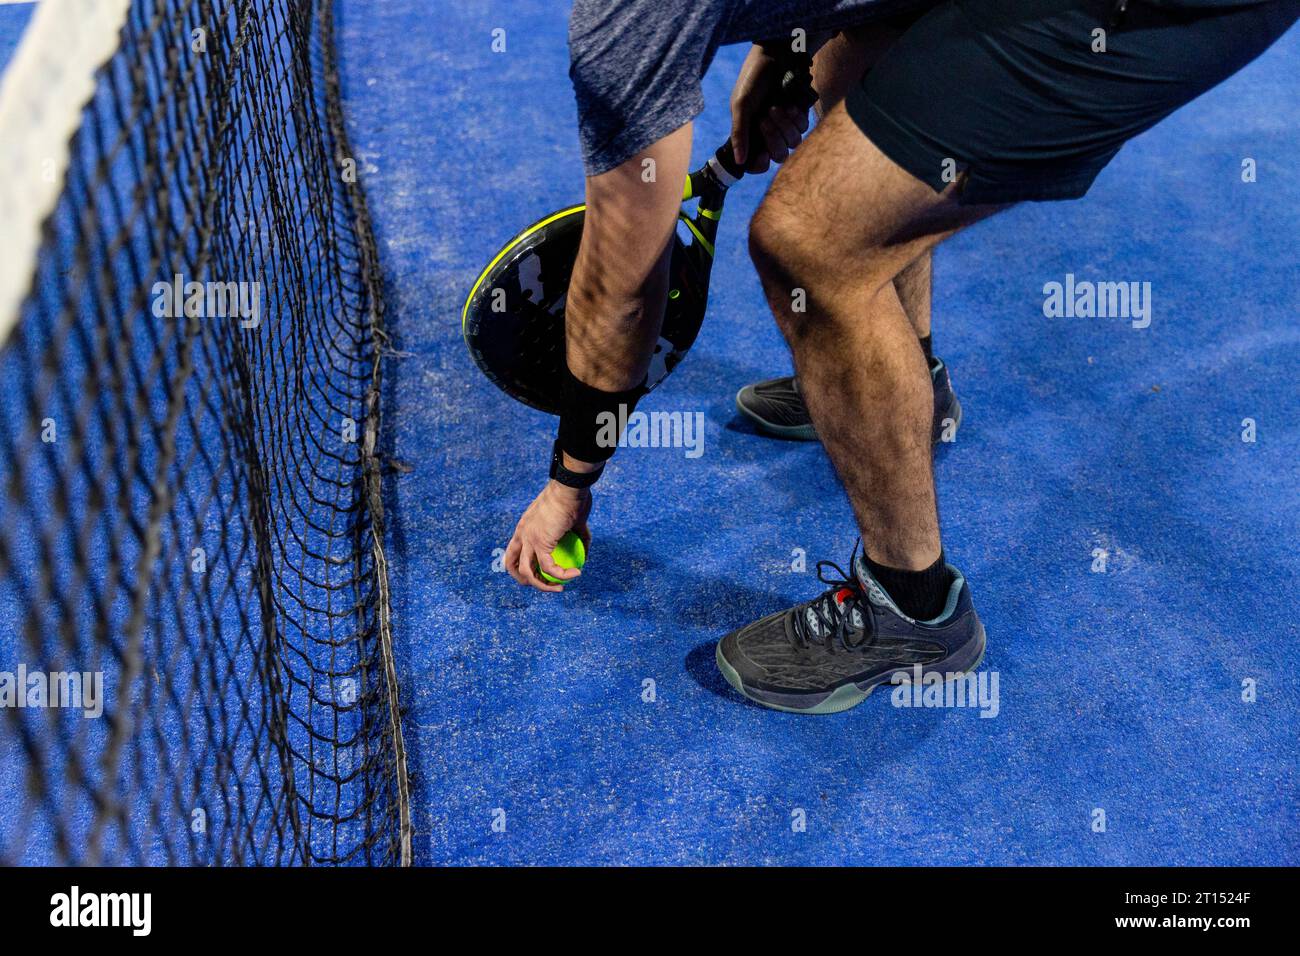 Man playing a padel game in a blue court with his racket Stock Photo